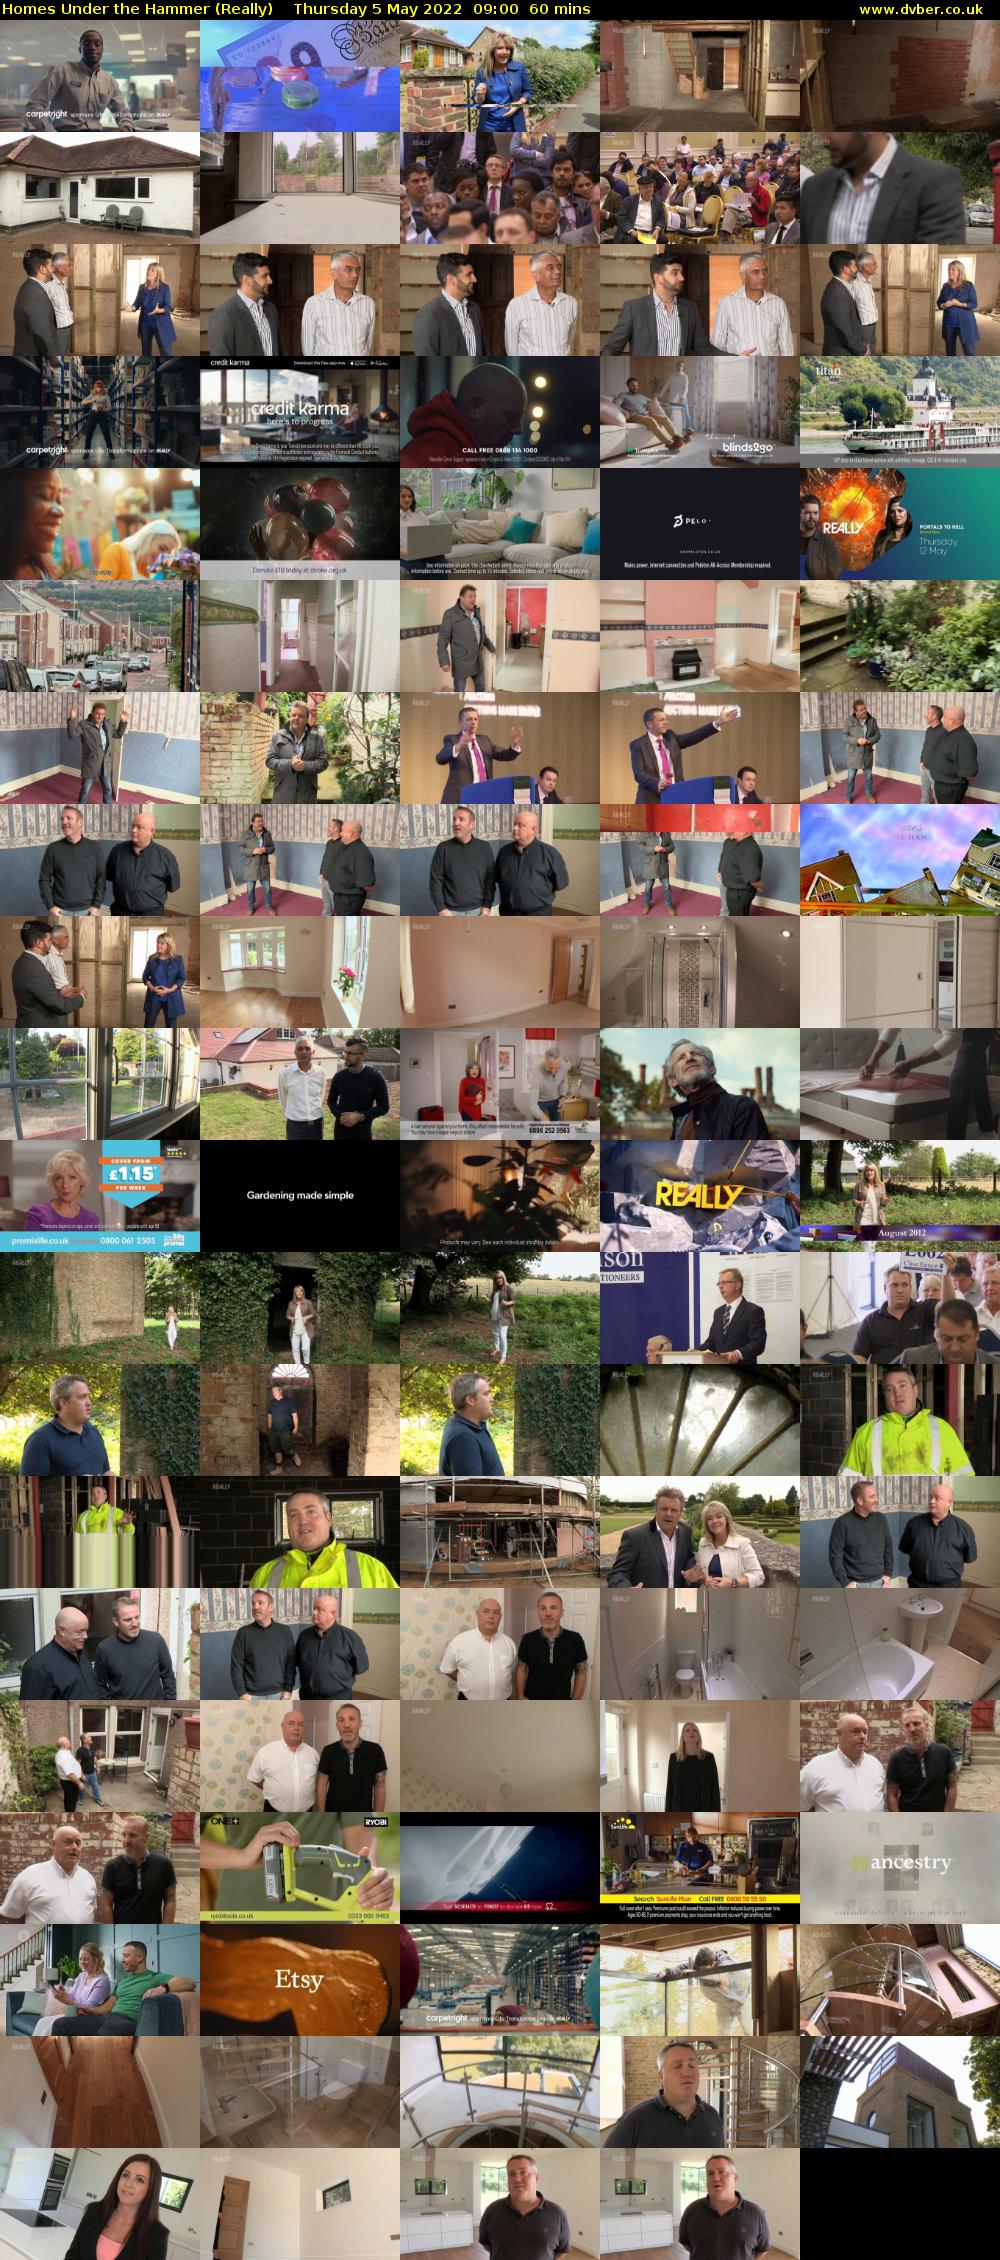 Homes Under the Hammer (Really) Thursday 5 May 2022 09:00 - 10:00